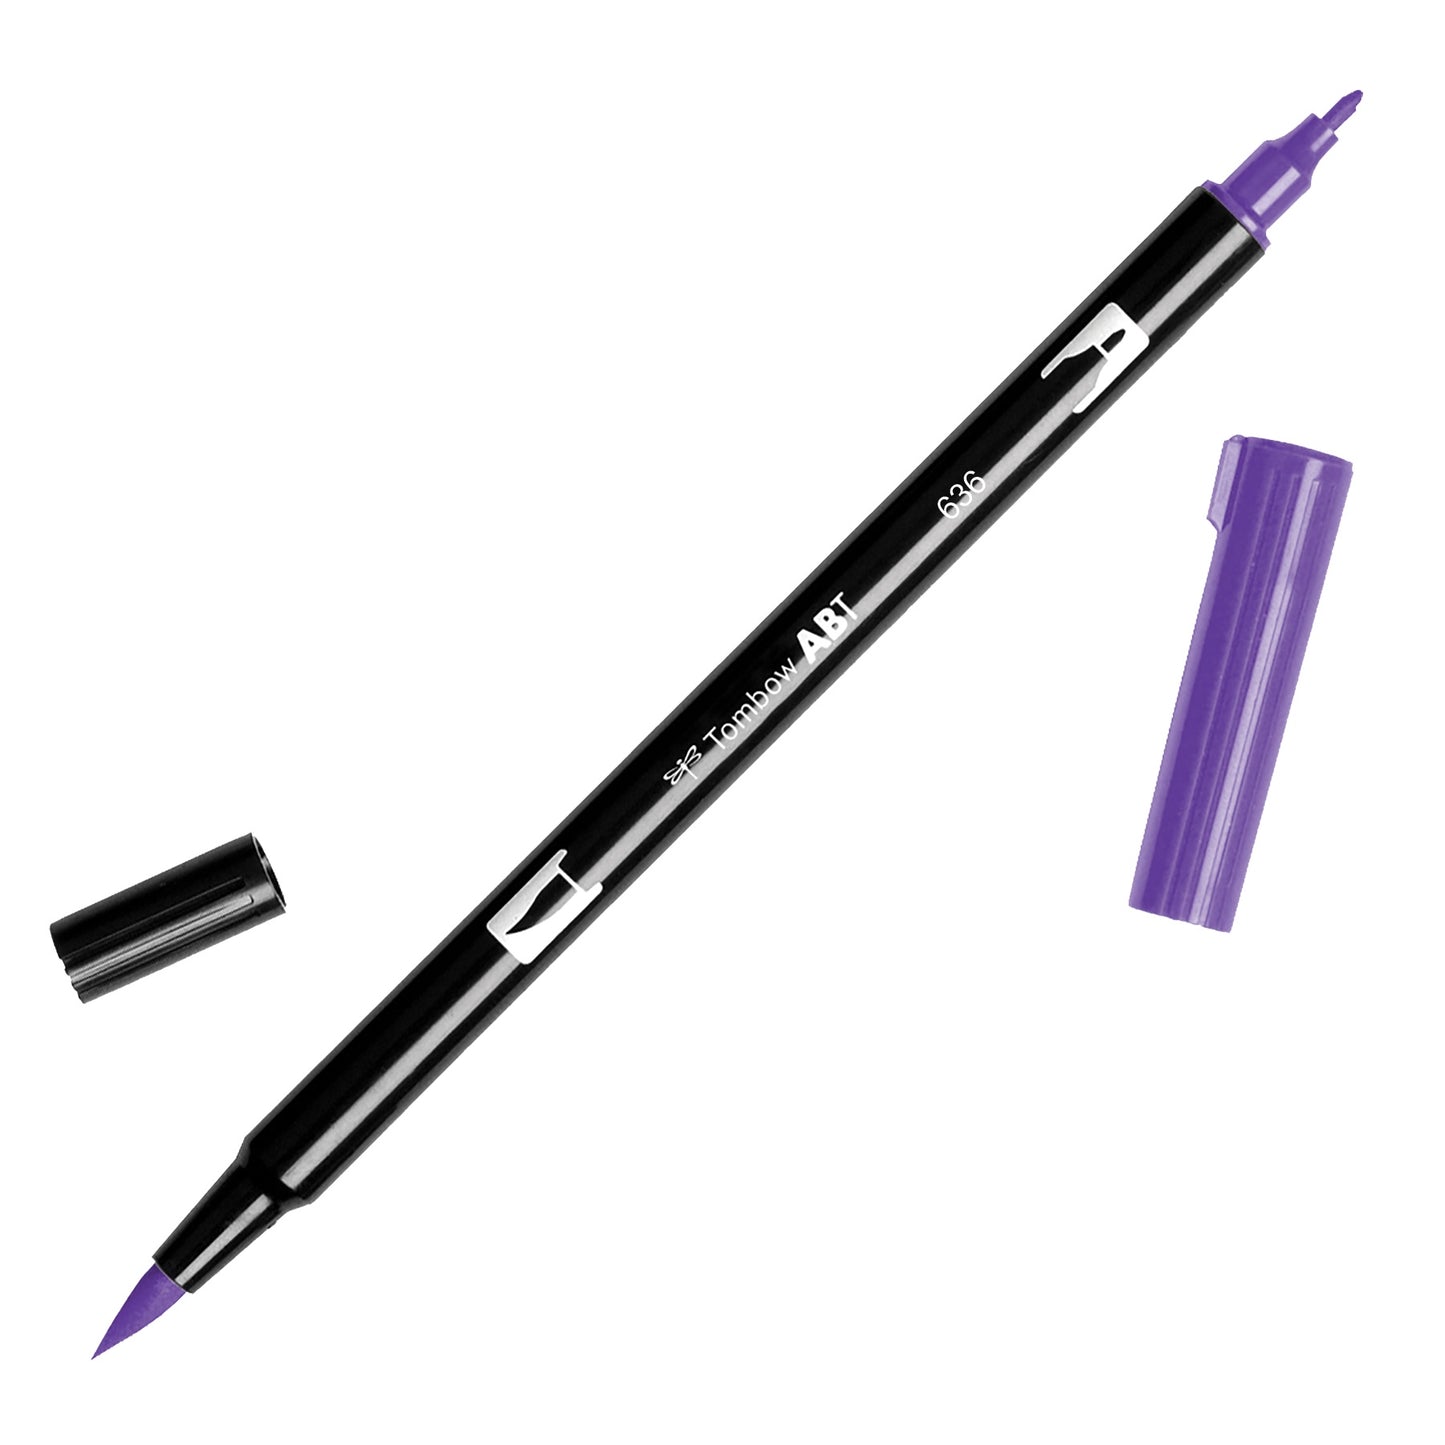 TOMBOW 636 IMPERIAL PURPLE DUAL BRUSH MARKER